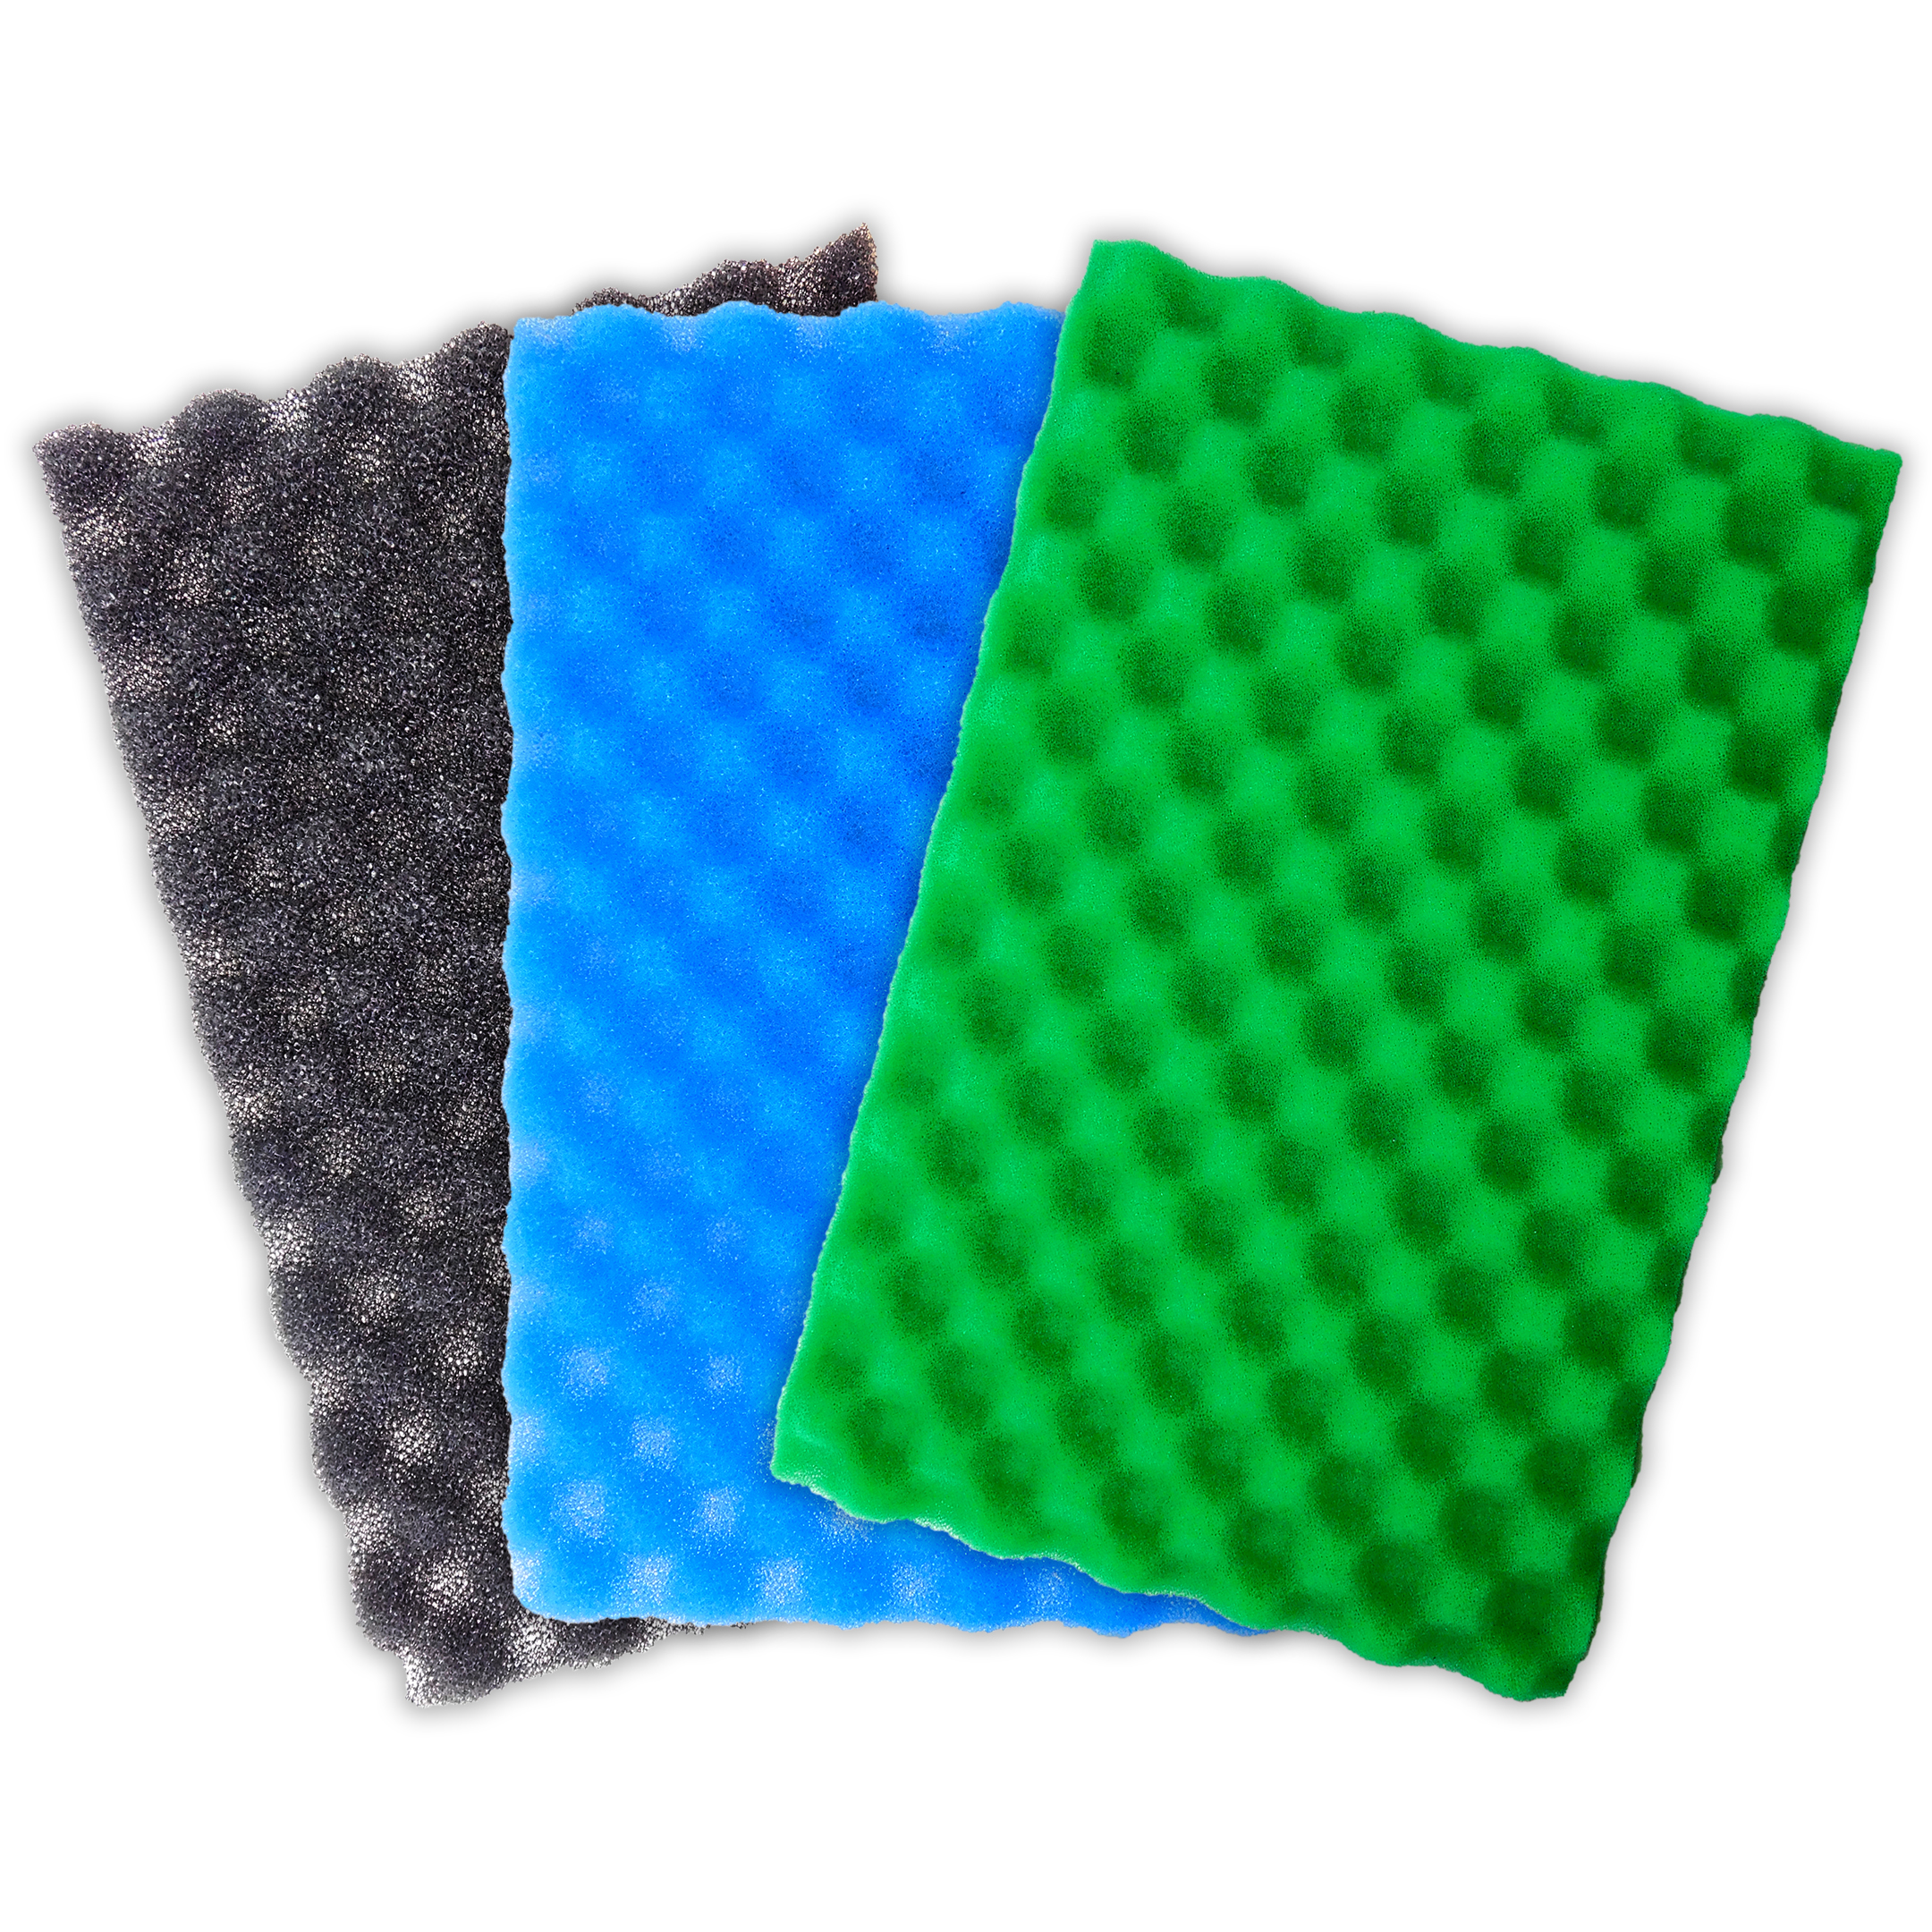 Fine FISH POND SPARE REPLACEMENT FILTER FOAM SET Medium and Coarse Pack of 3 